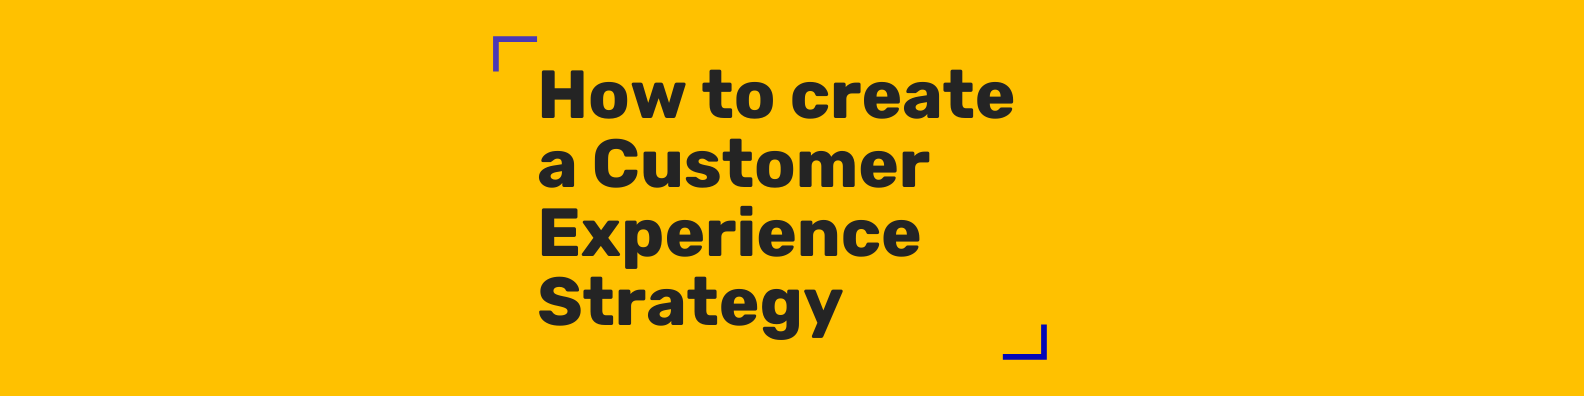 How to create a Customer Experience Strategy